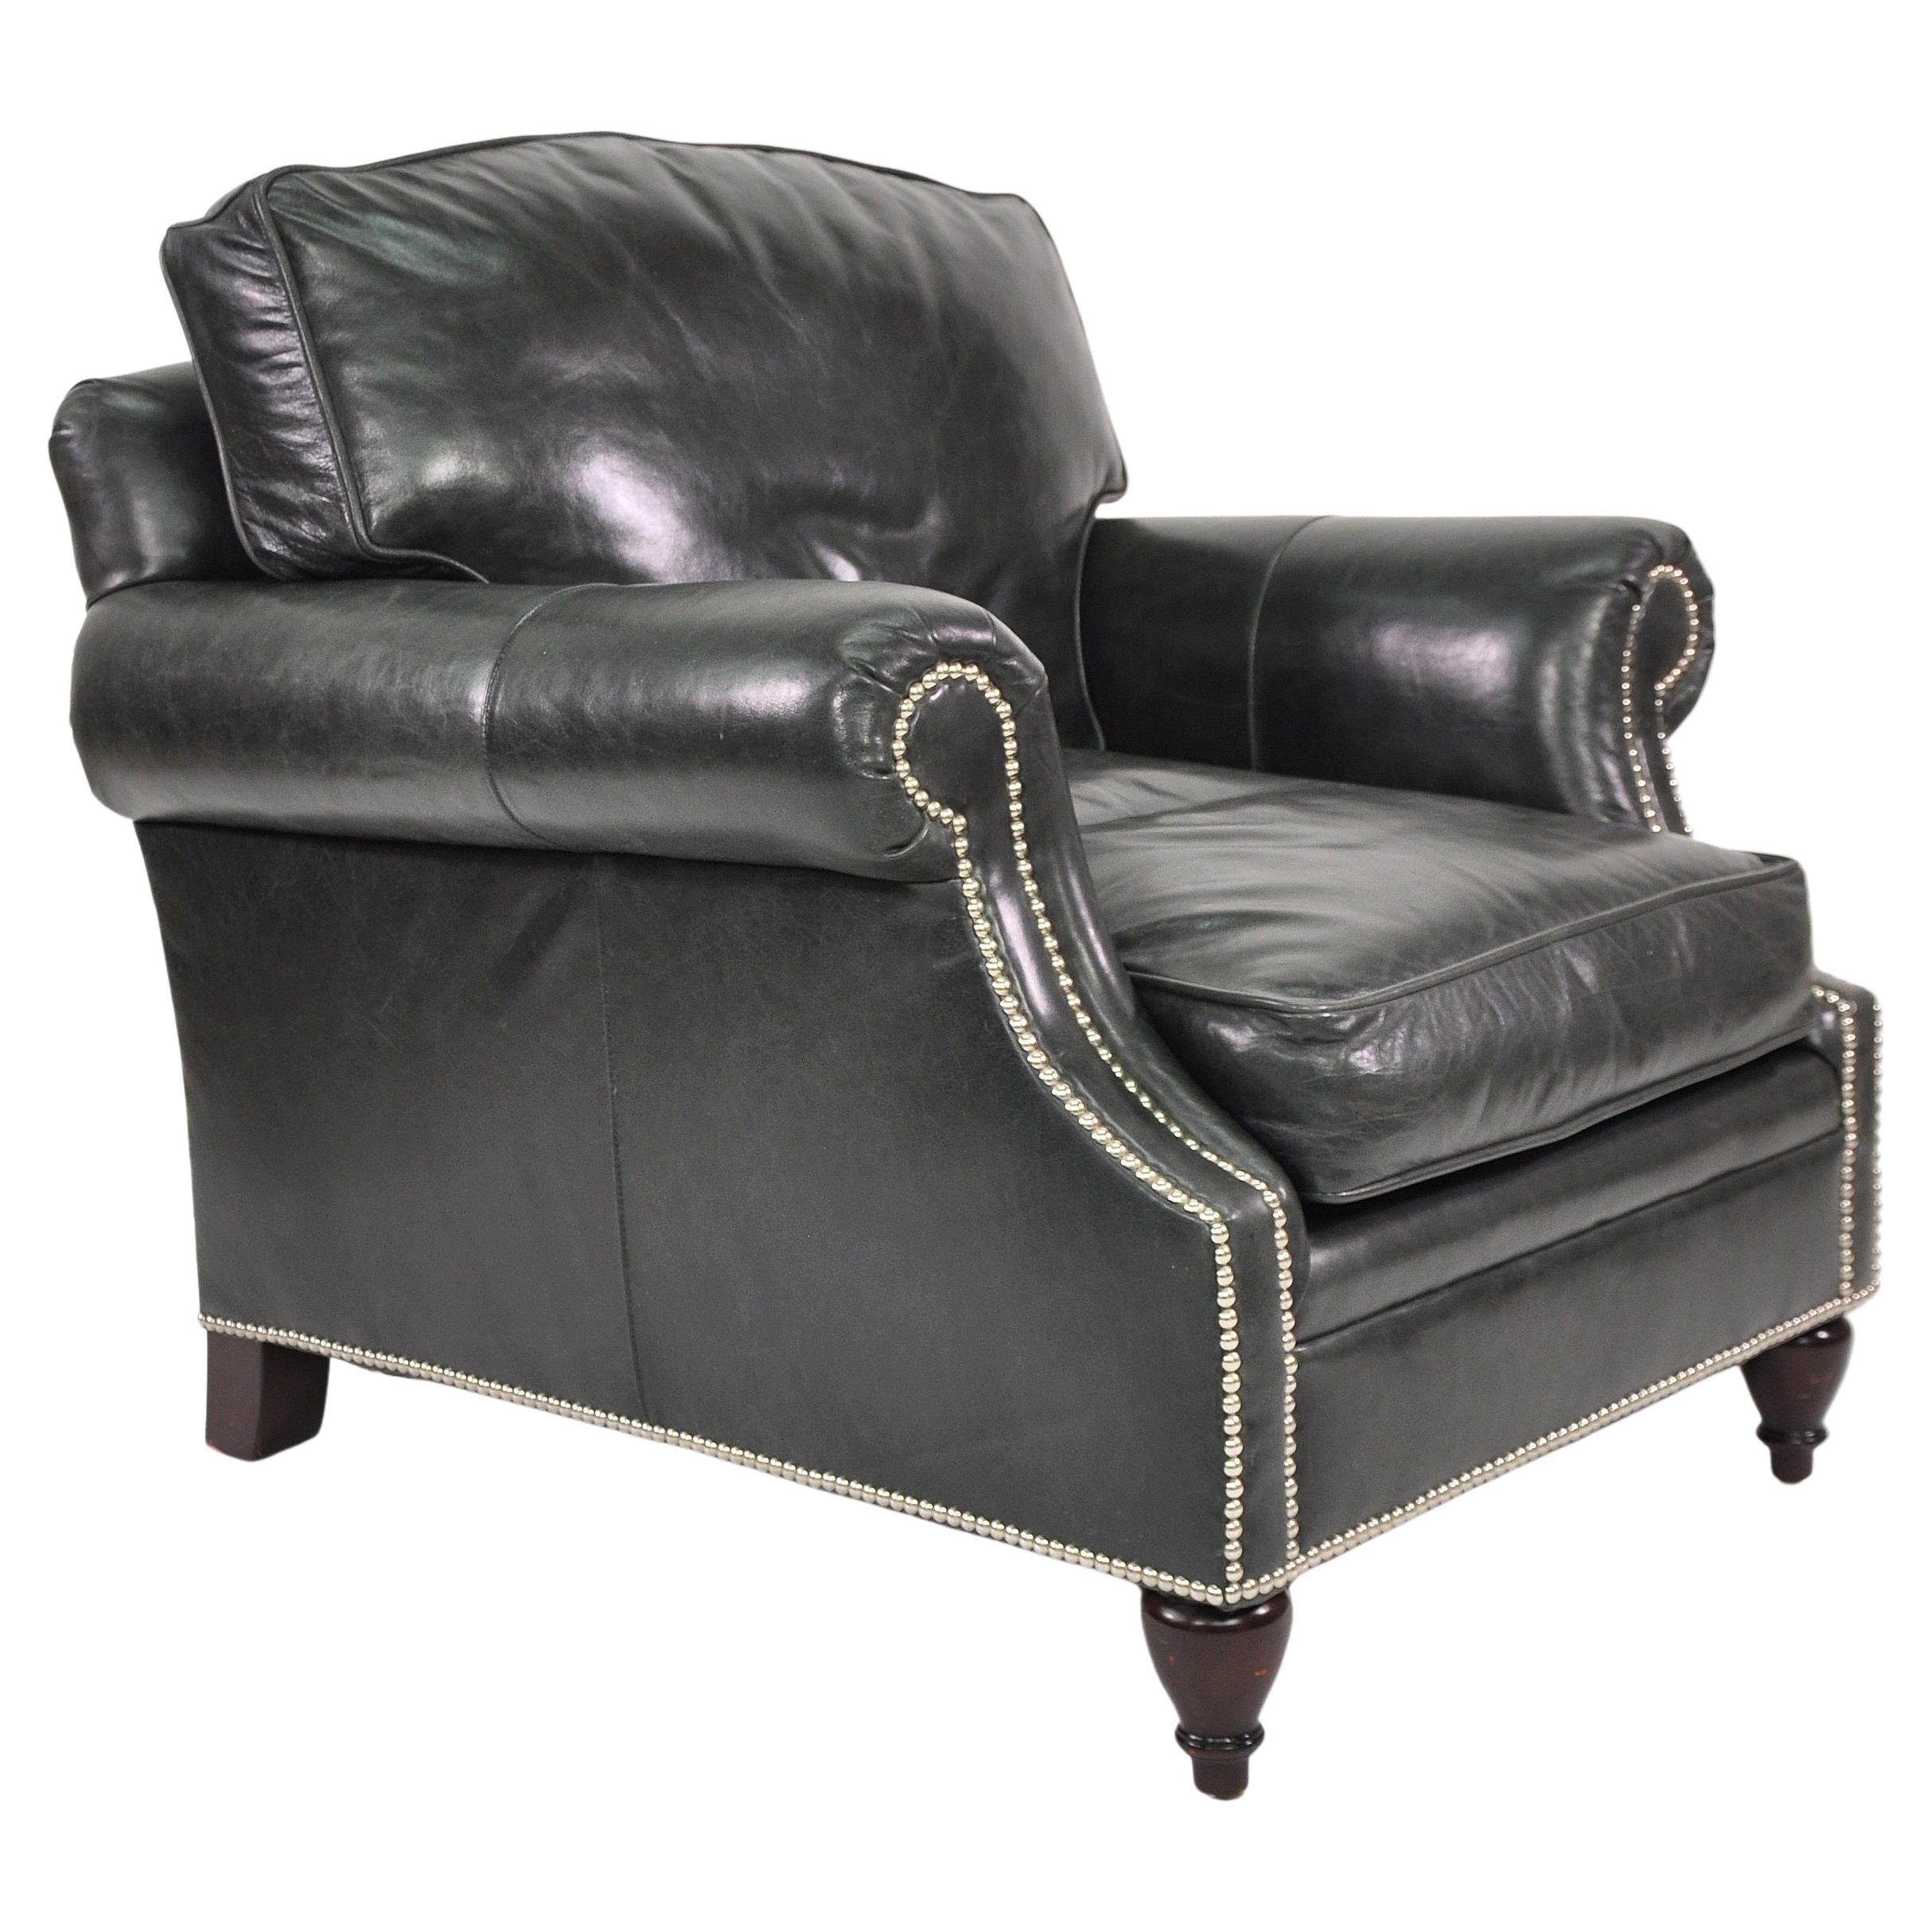 Luxurious Ralph Lauren leather lounge chair with nailhead trim and turned mahogany wood legs. The Regency style armchair has very comfortable, down-filled cushions and elegant English rolled arms. It's stylishly covered in a gorgeous Ralph Lauren